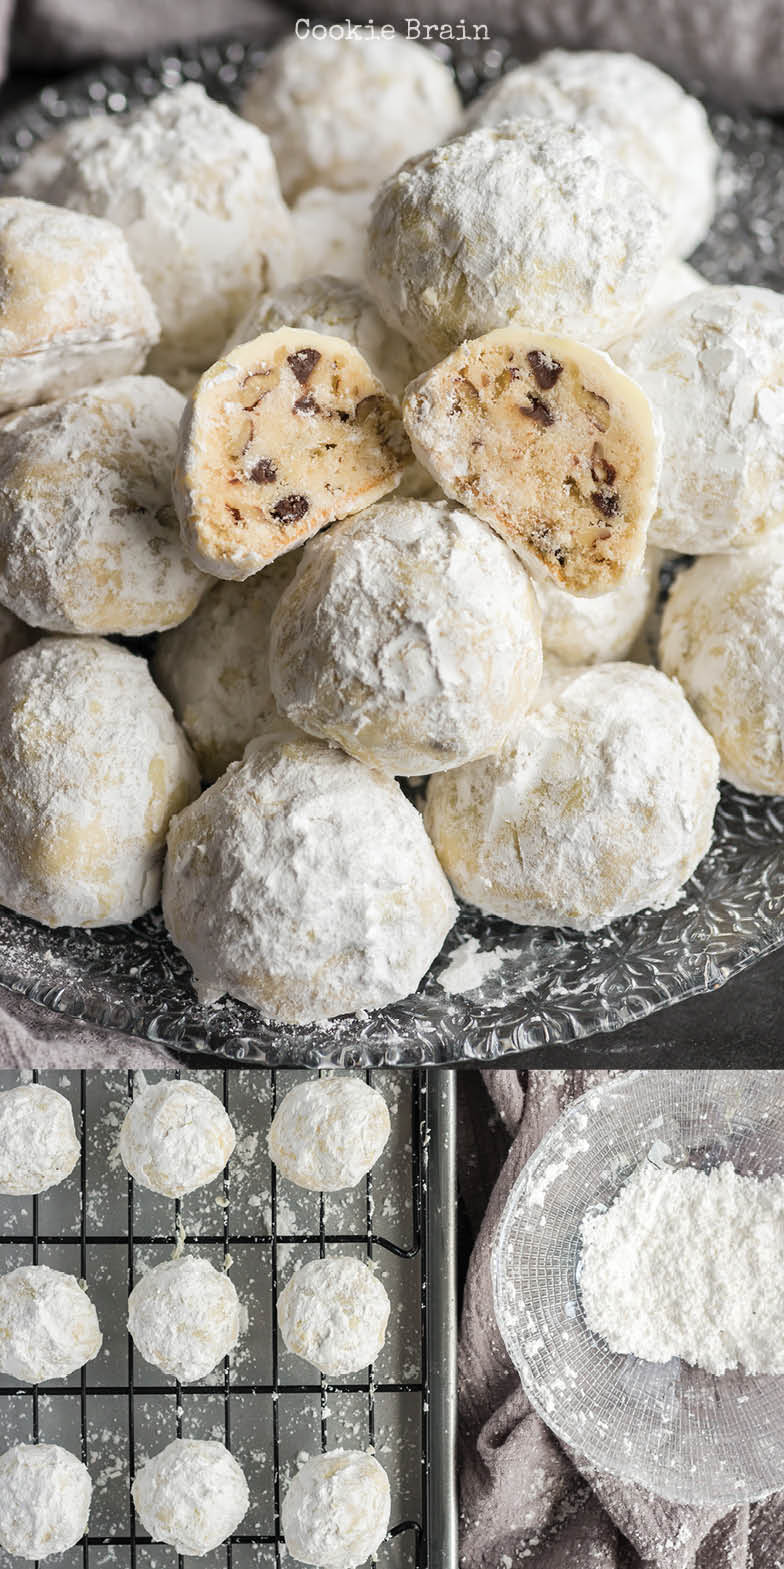 These buttery, melt-in-your-mouth chocolate chip snowball cookies are the perfect winter treat. Whether you call them Russian tea cakes or Mexican wedding cookies, you can call them amazing!